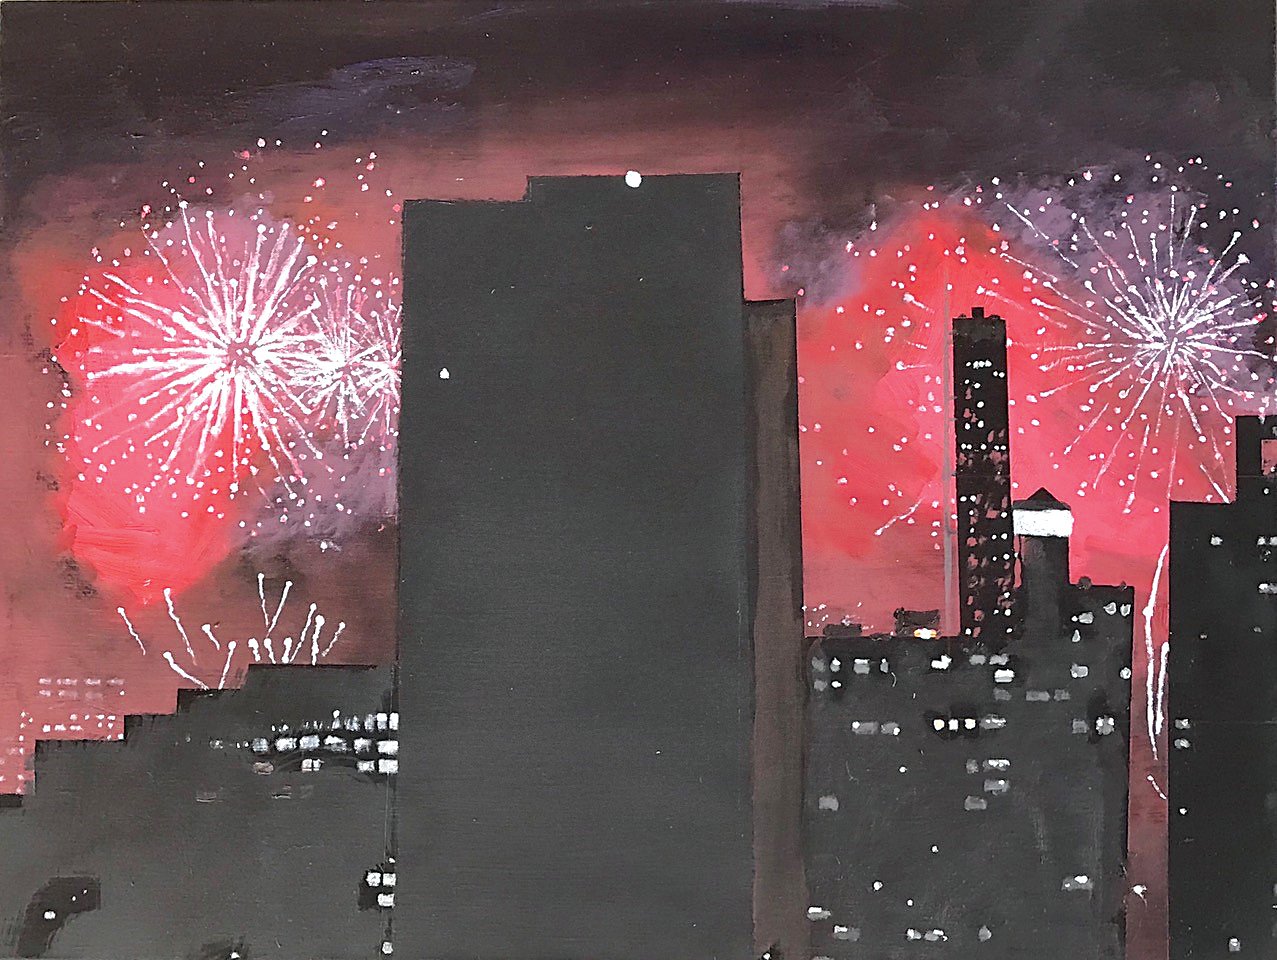 “I enter 2020 at work on the 71st floor of 3 World Trade Center, my new painting studio in the sky,” wrote Todd Stone, the painter of this view and president of the Gallows Run Watershed Association in Bucks County.